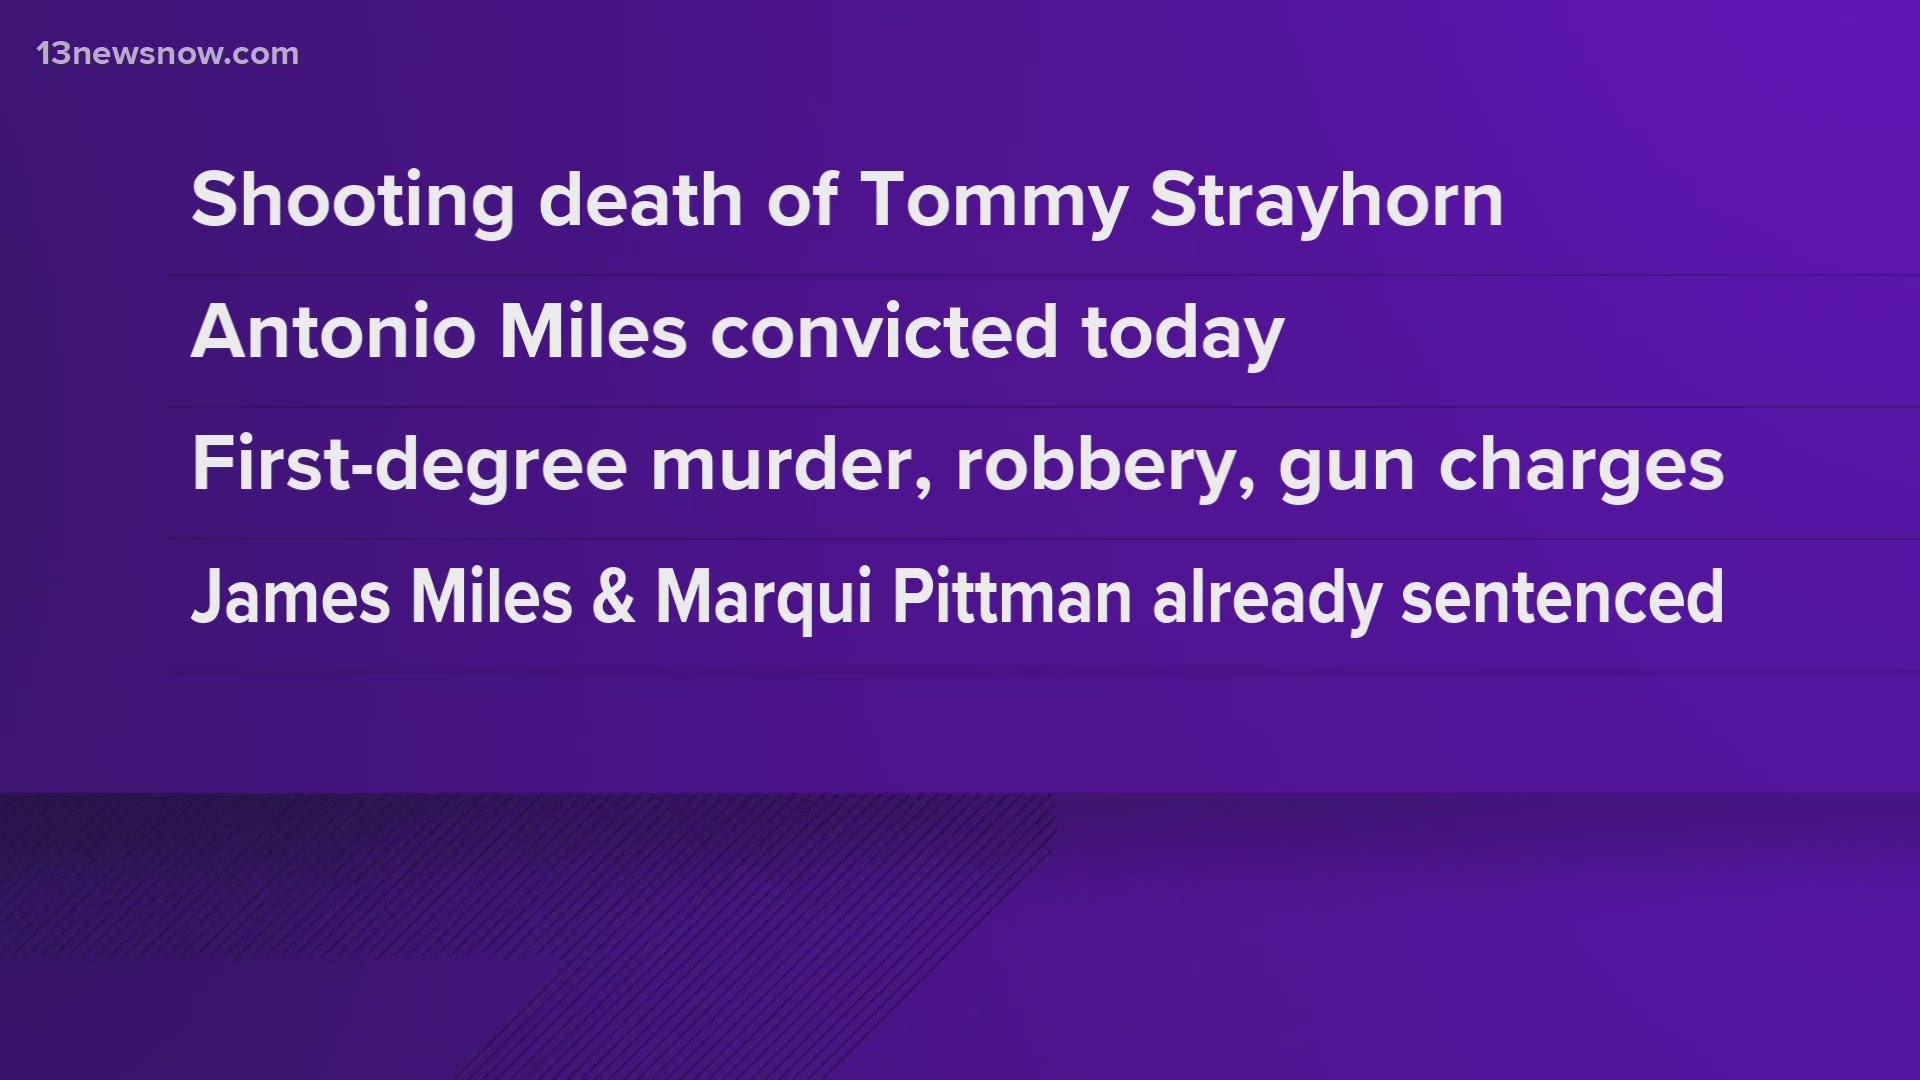 Antonio Miles was found guilty in the deadly shooting of Tommy Strayhorn in 2016. Two other men have also been found guilty of the murder.